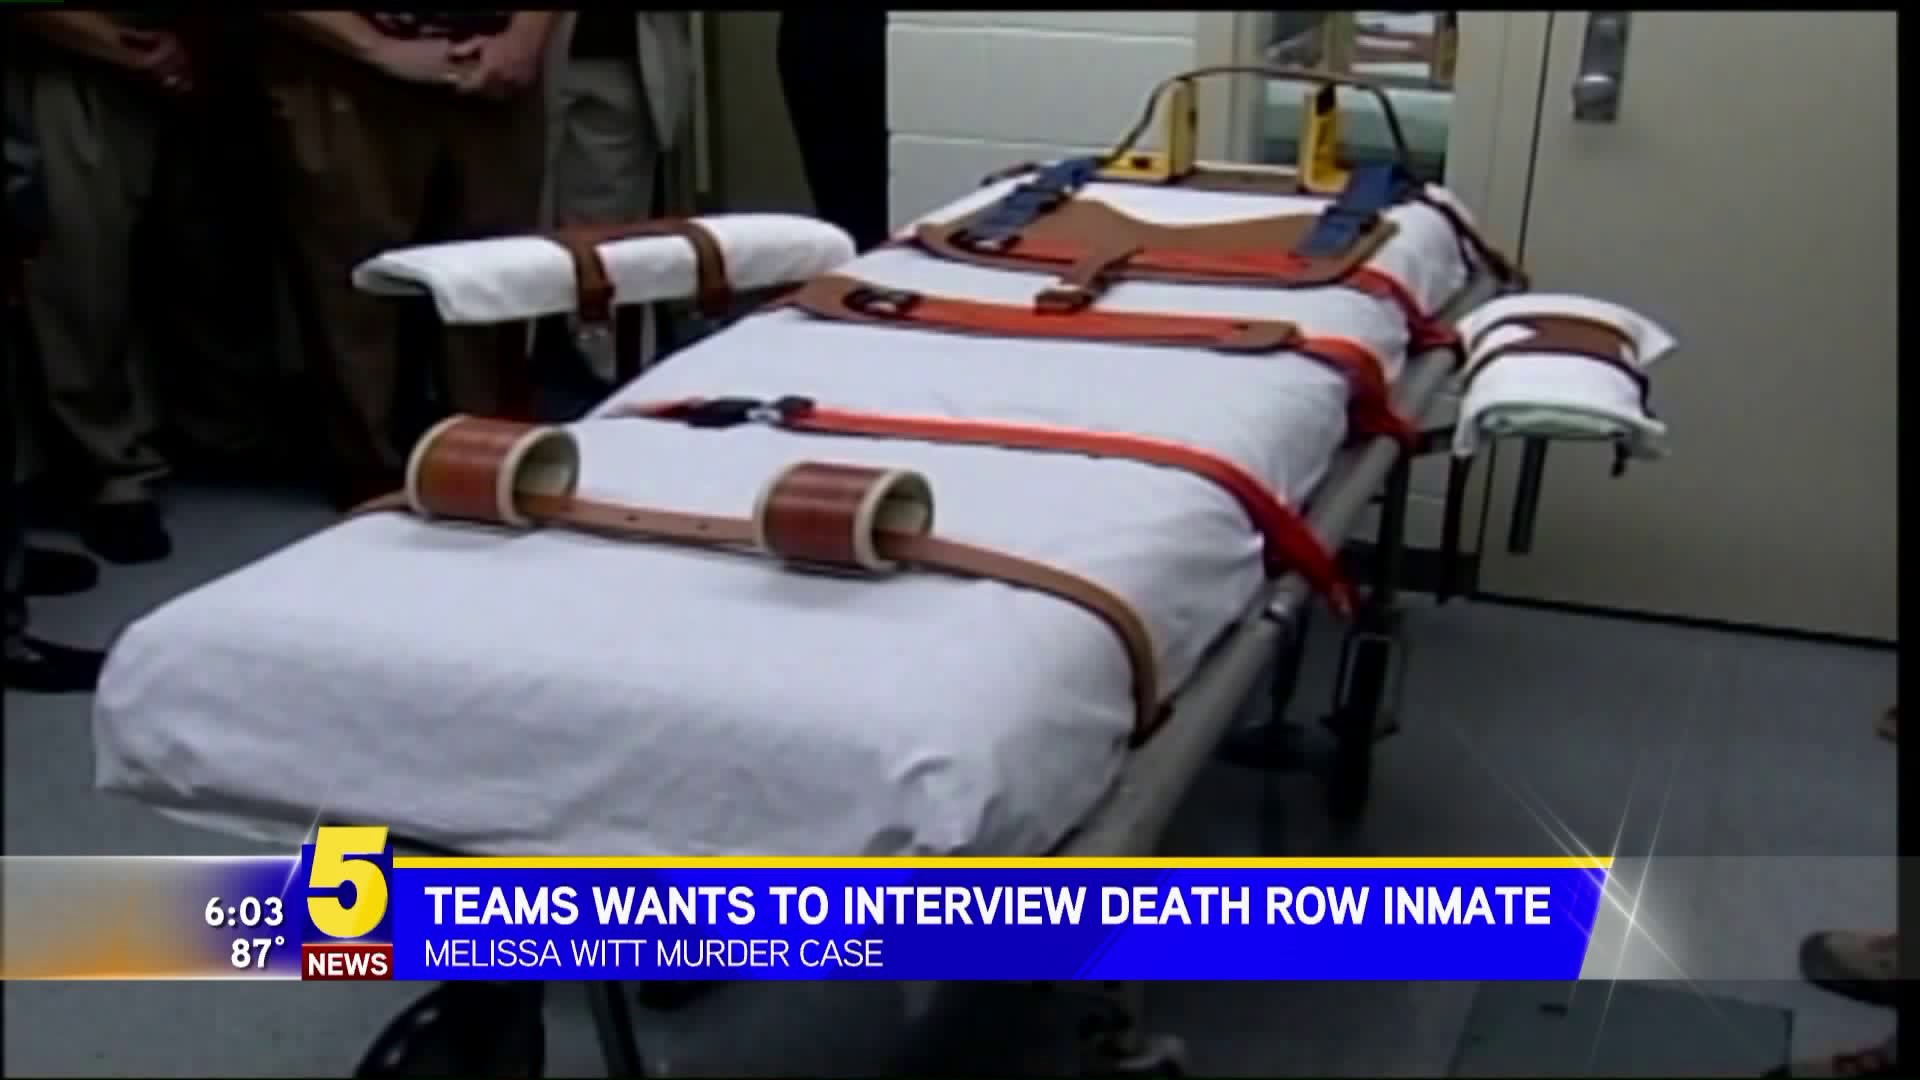 Team Wants To Interview Death Row Inmate